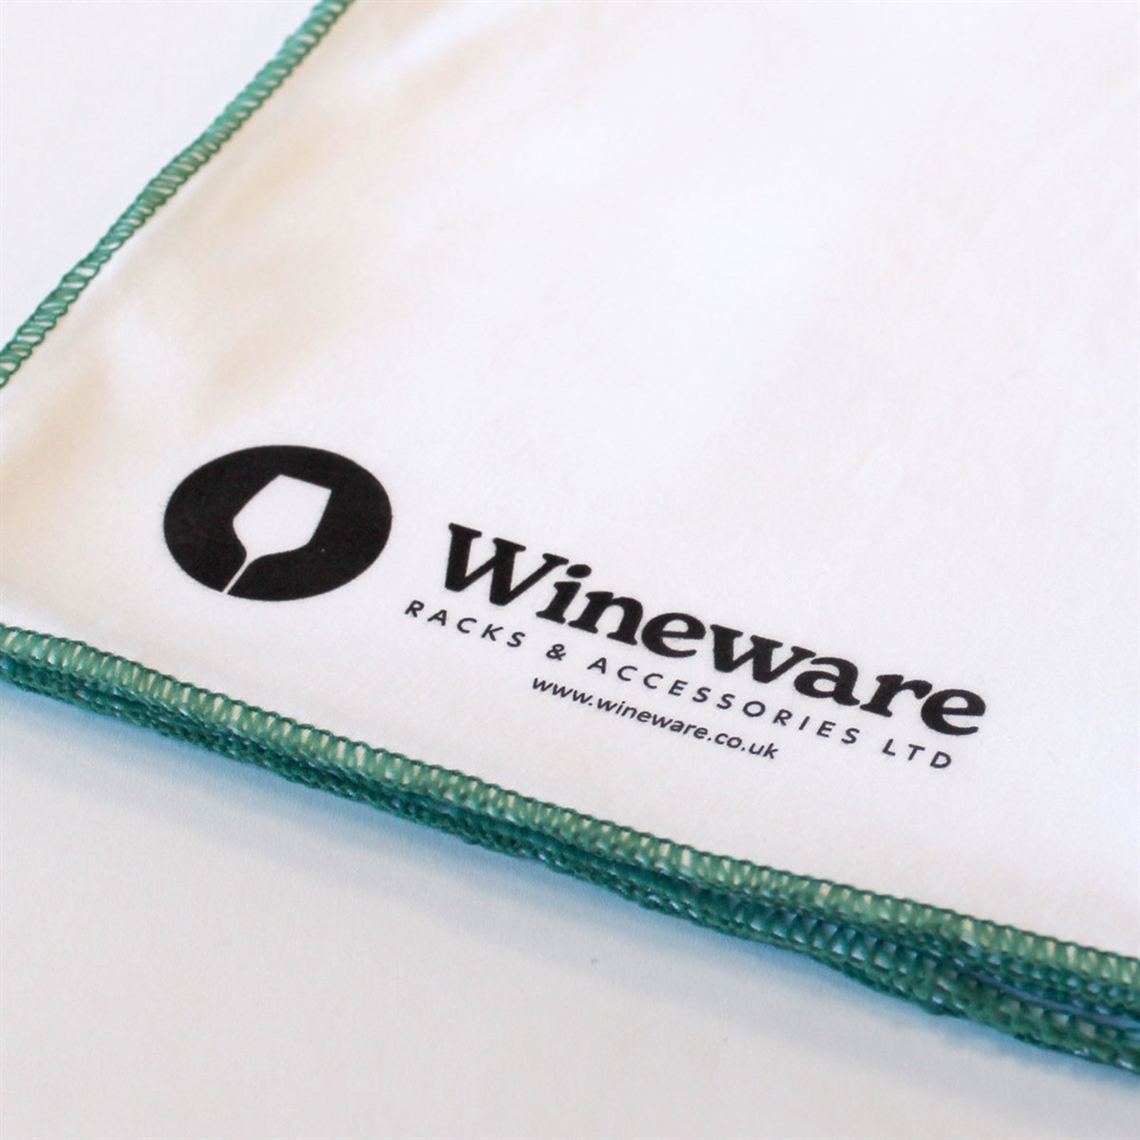 View more white wine glasses from our Wine Glass Cleaning & Accessories range